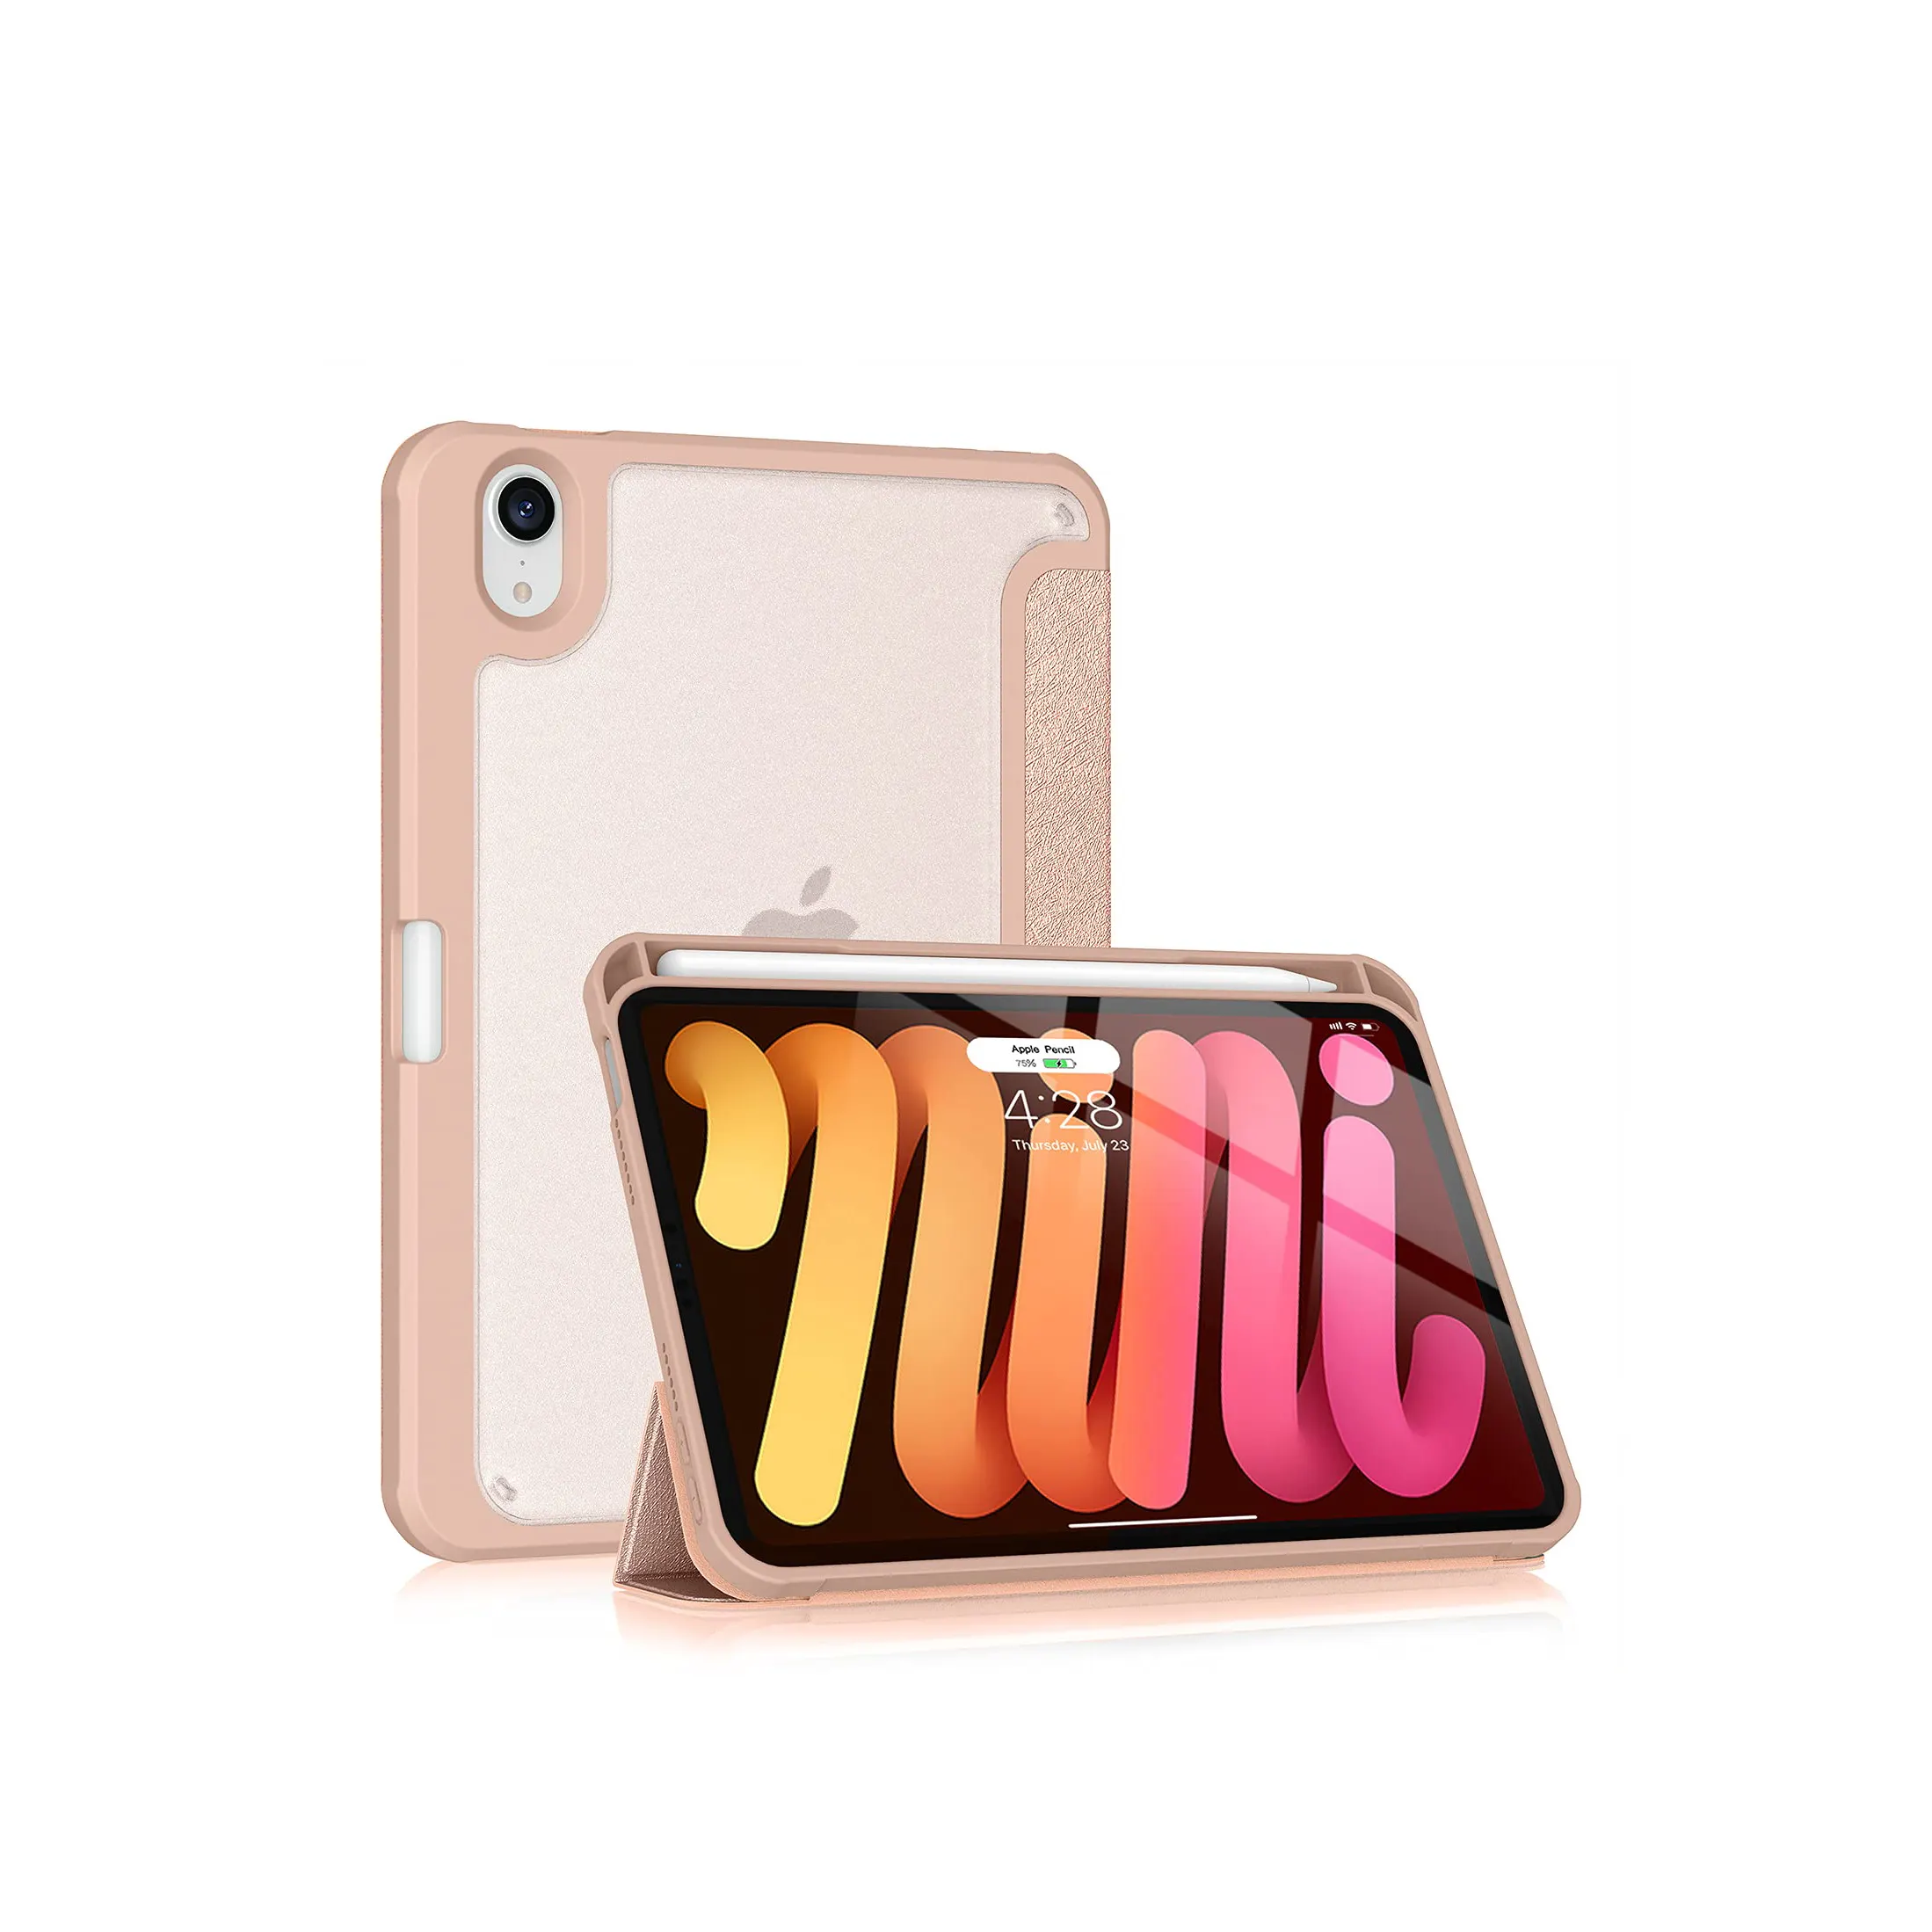 Factory for iPad mini 6 tablet case shockproof case for iPad mini 1/2/3/4 for iPad mini 6 case pink